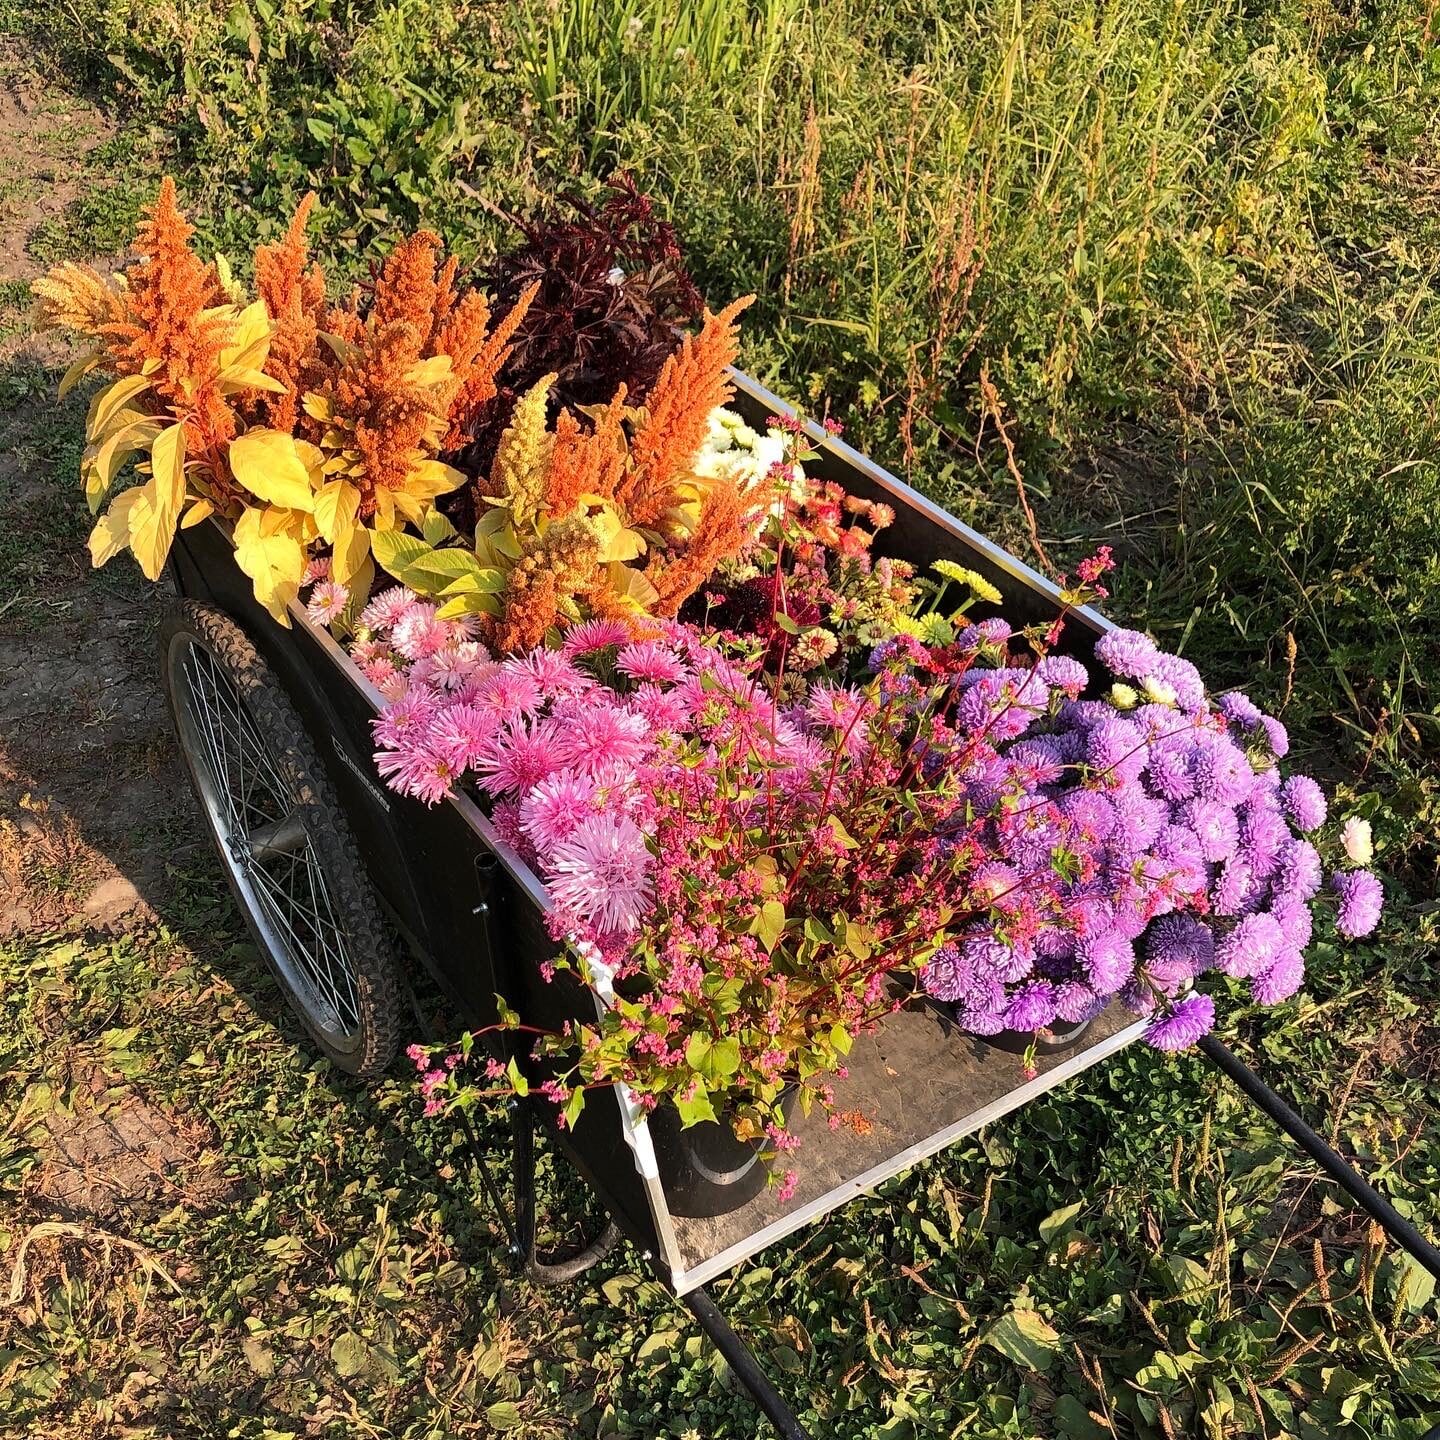 Cart full of breathtaking flowers on Rocky Creek Farm on the Lewis and Clark National Historic Trail